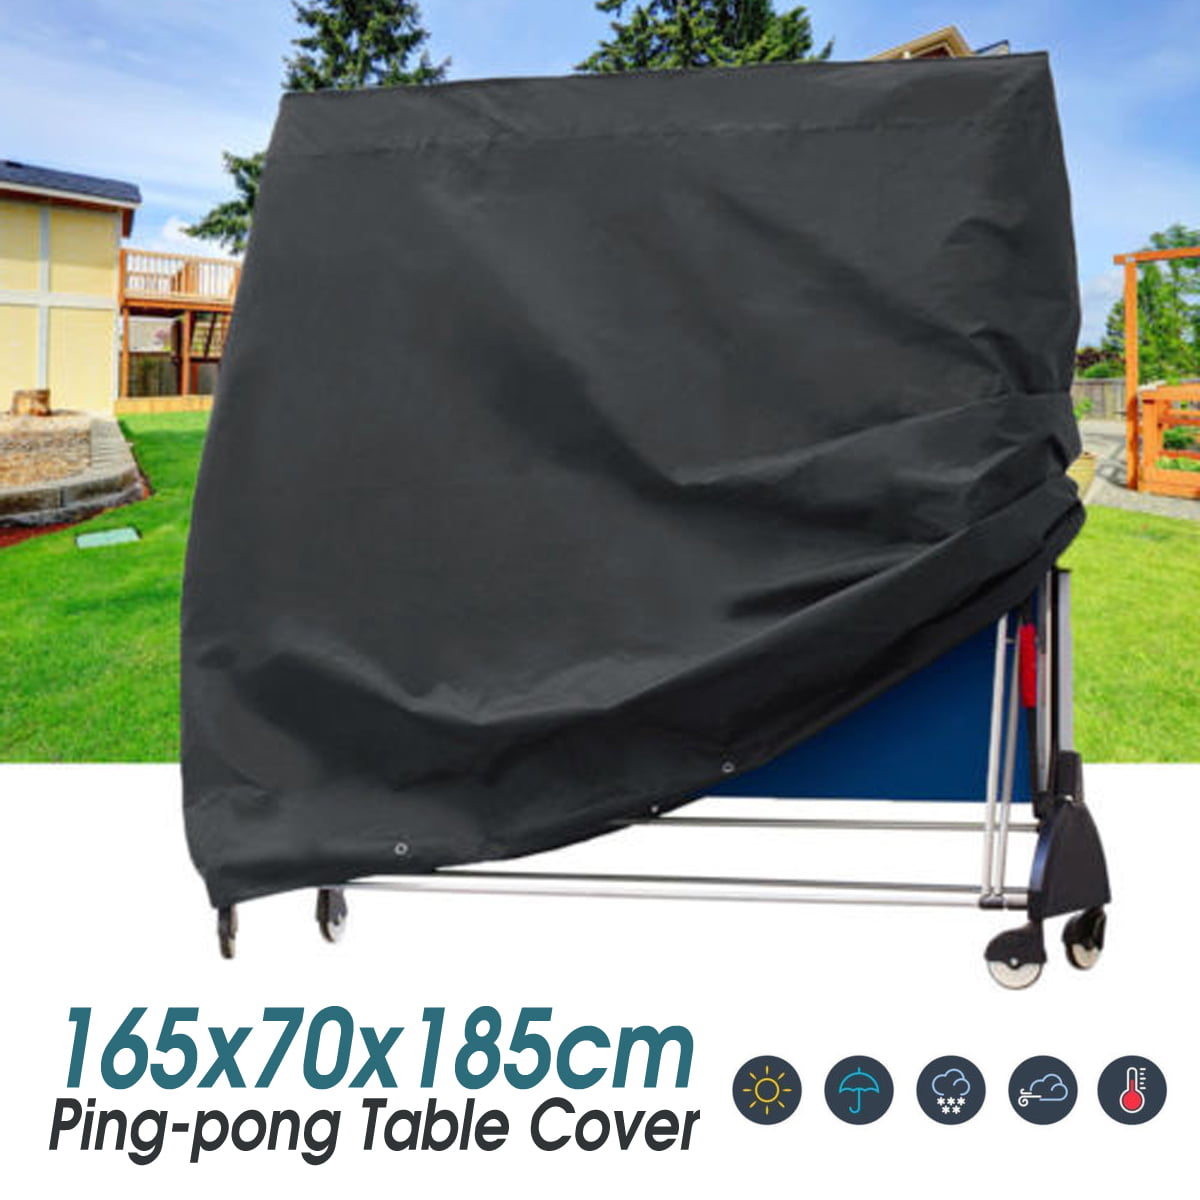 Details about   Ping Pong Table Storage Cover Table Tennis Sheet Indoor Outdoor Protection COVER 